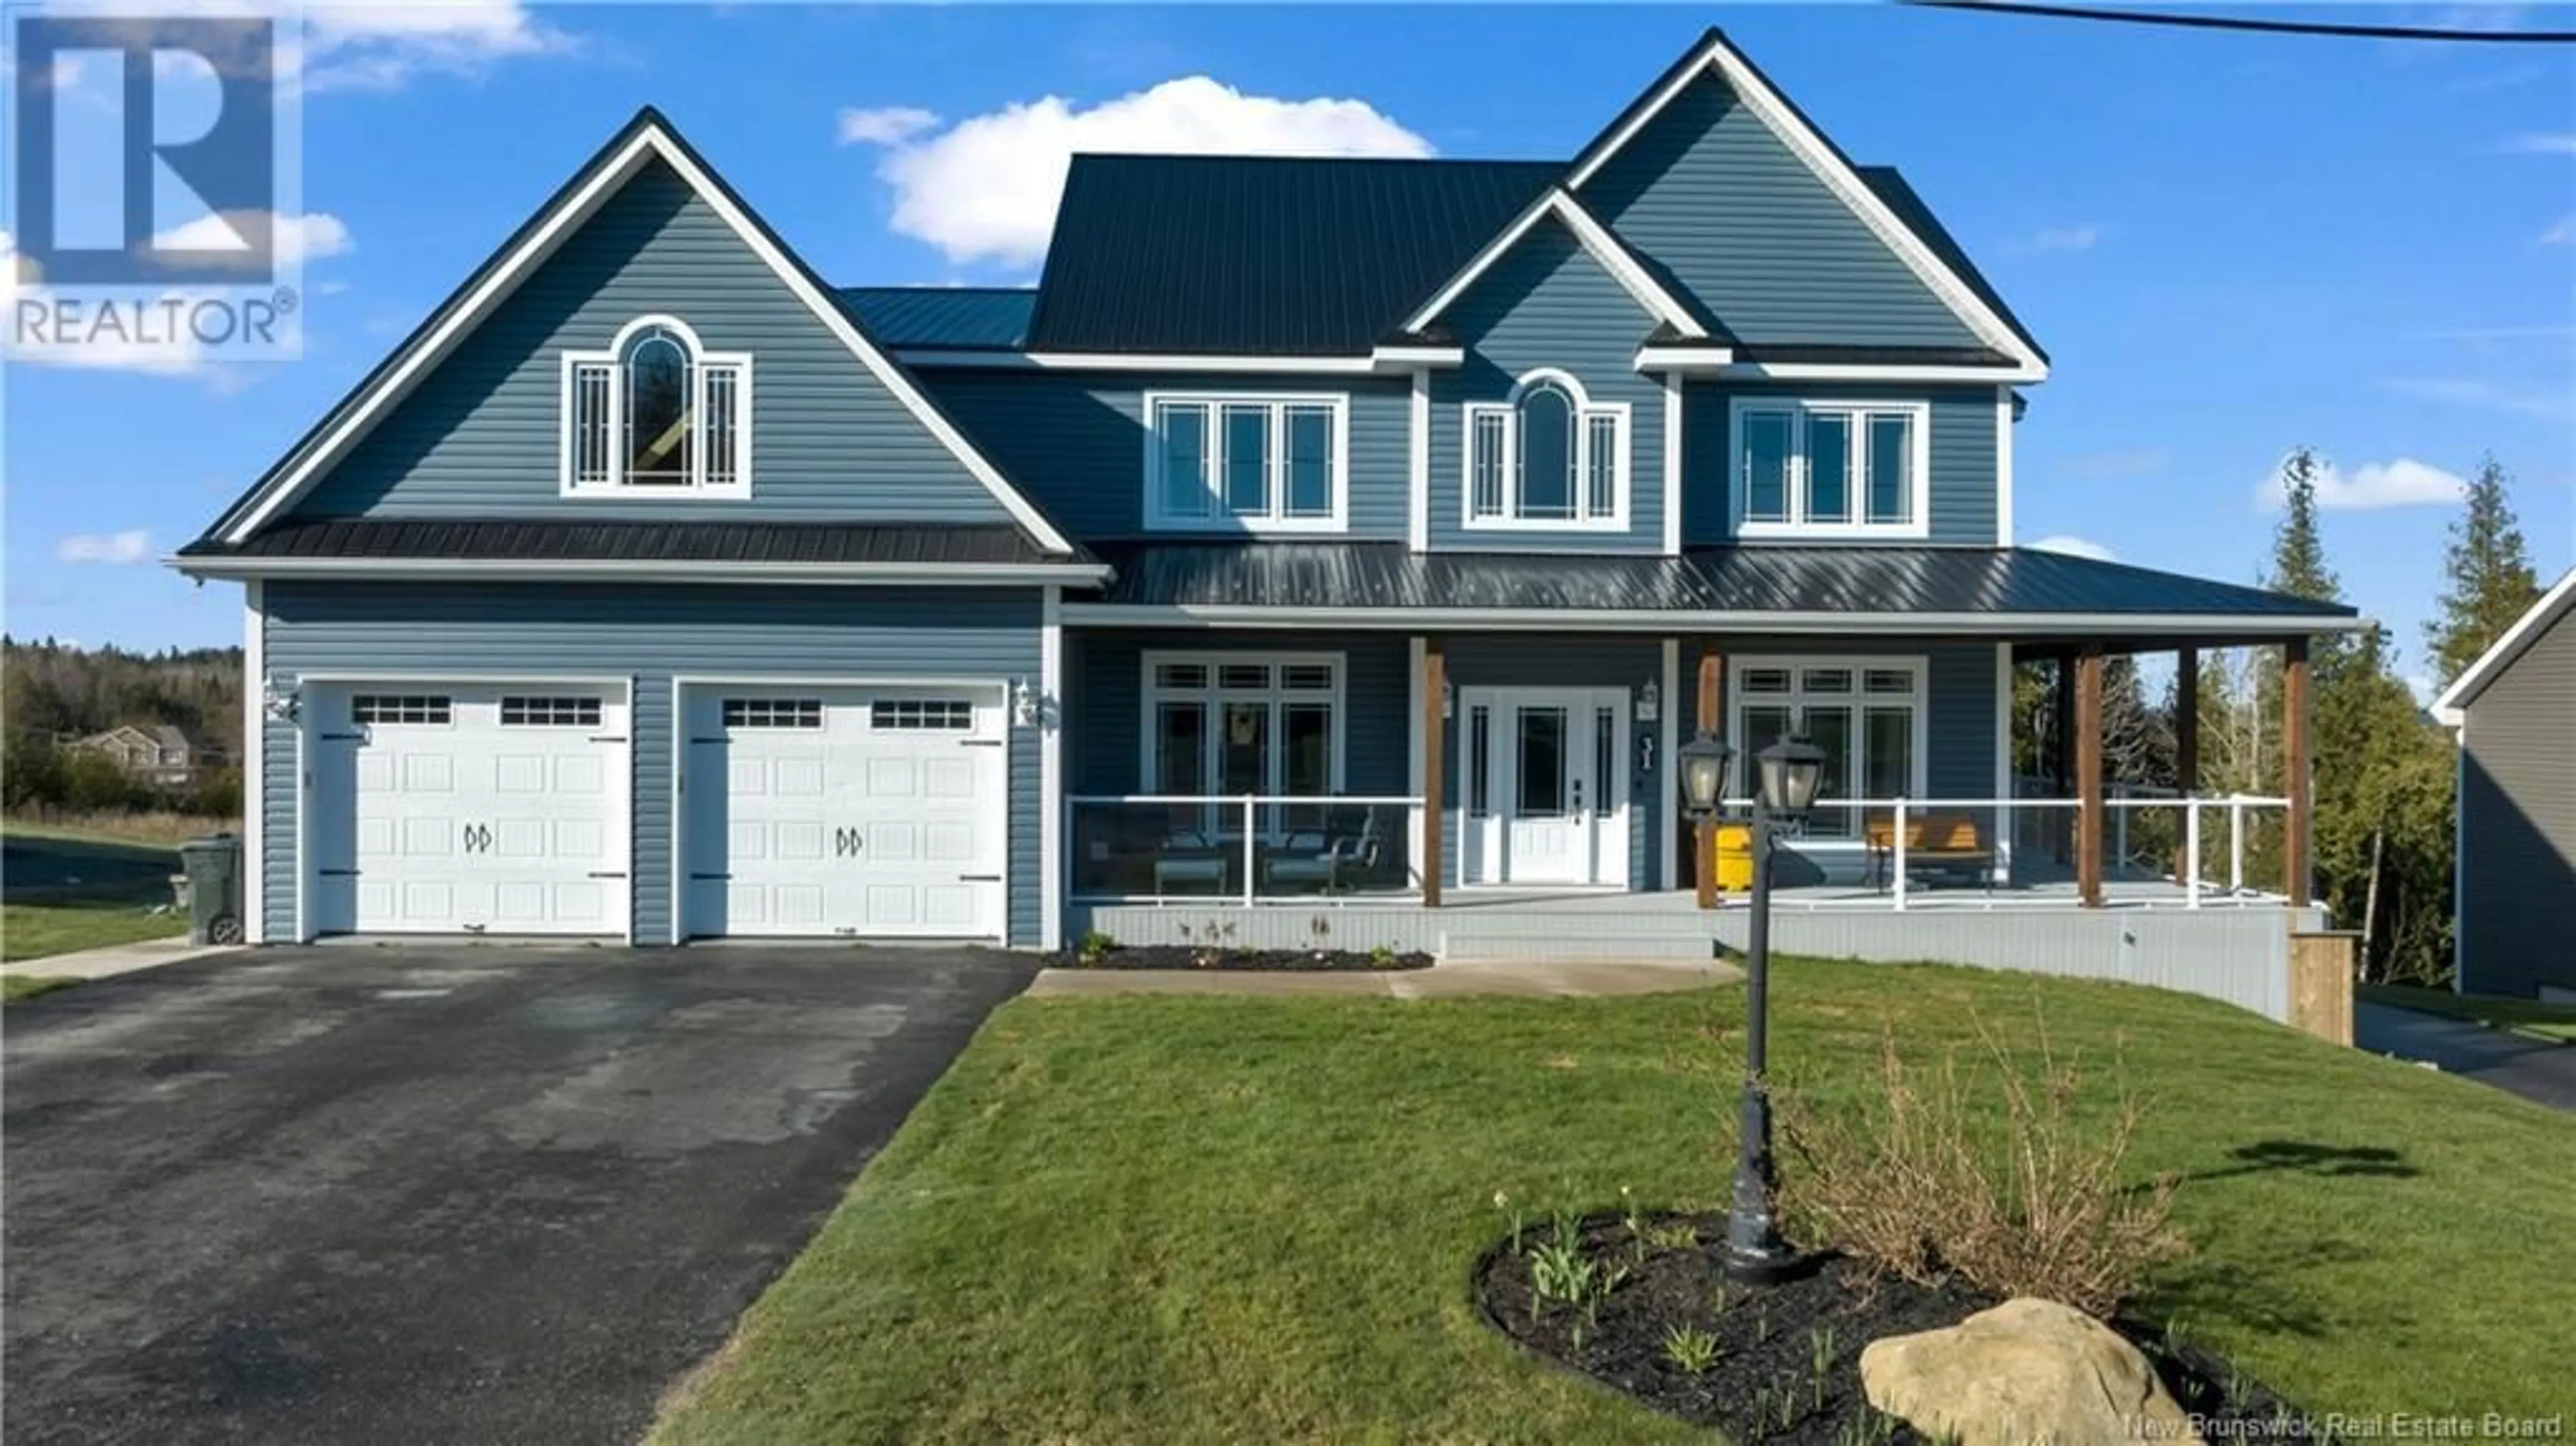 Home with vinyl exterior material for 31 Cobblestone Drive, Quispamsis New Brunswick E2G0A8